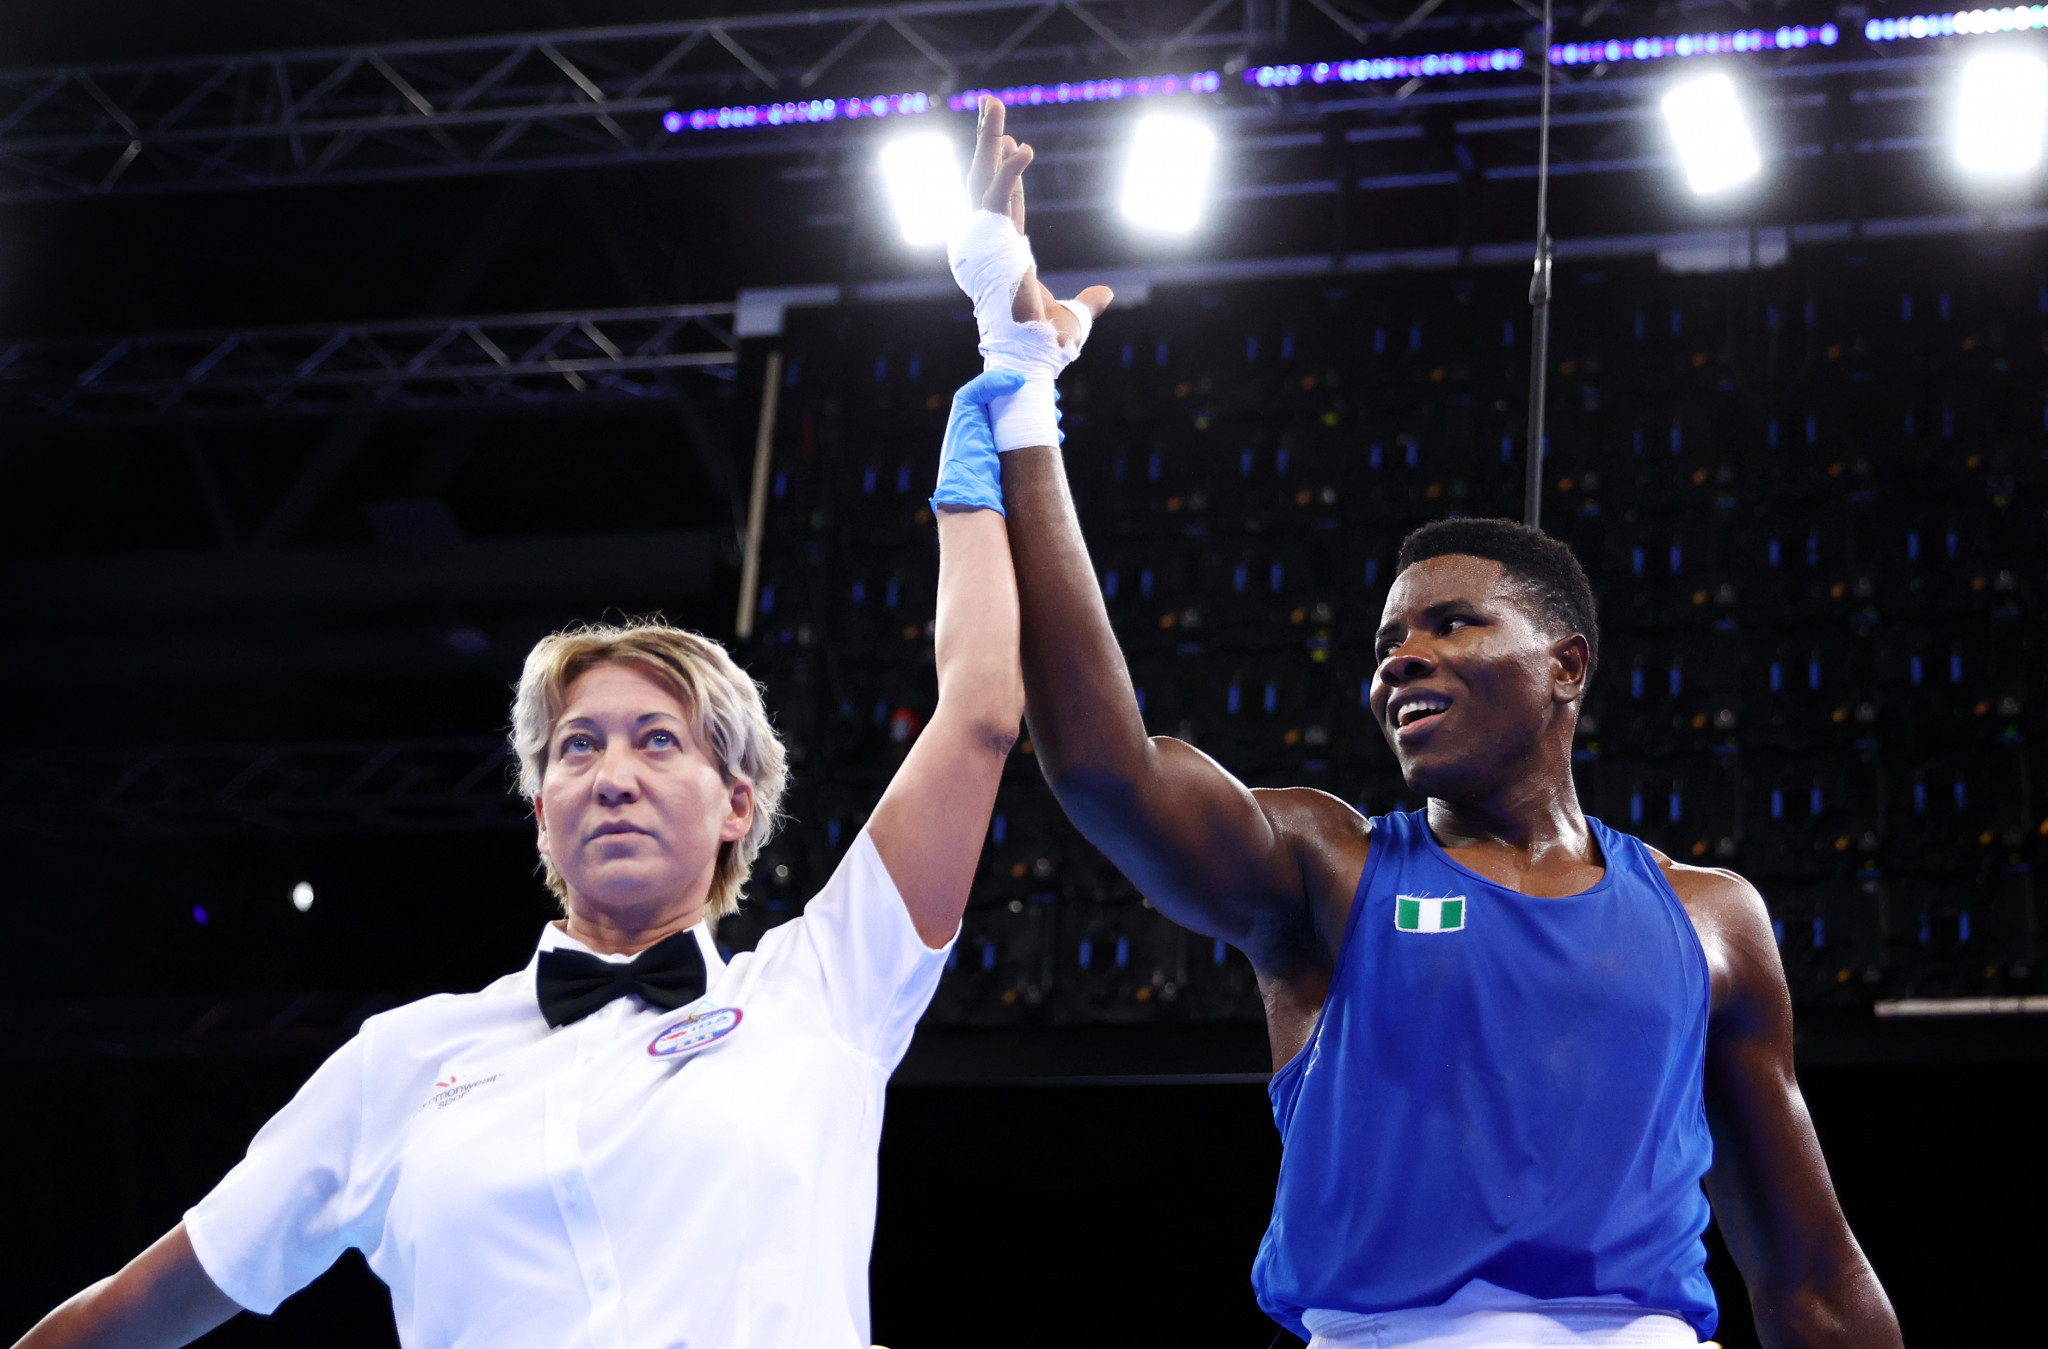 Nigerian boxer hoping to follow Birmingham 2022 bronze with victory at African Games